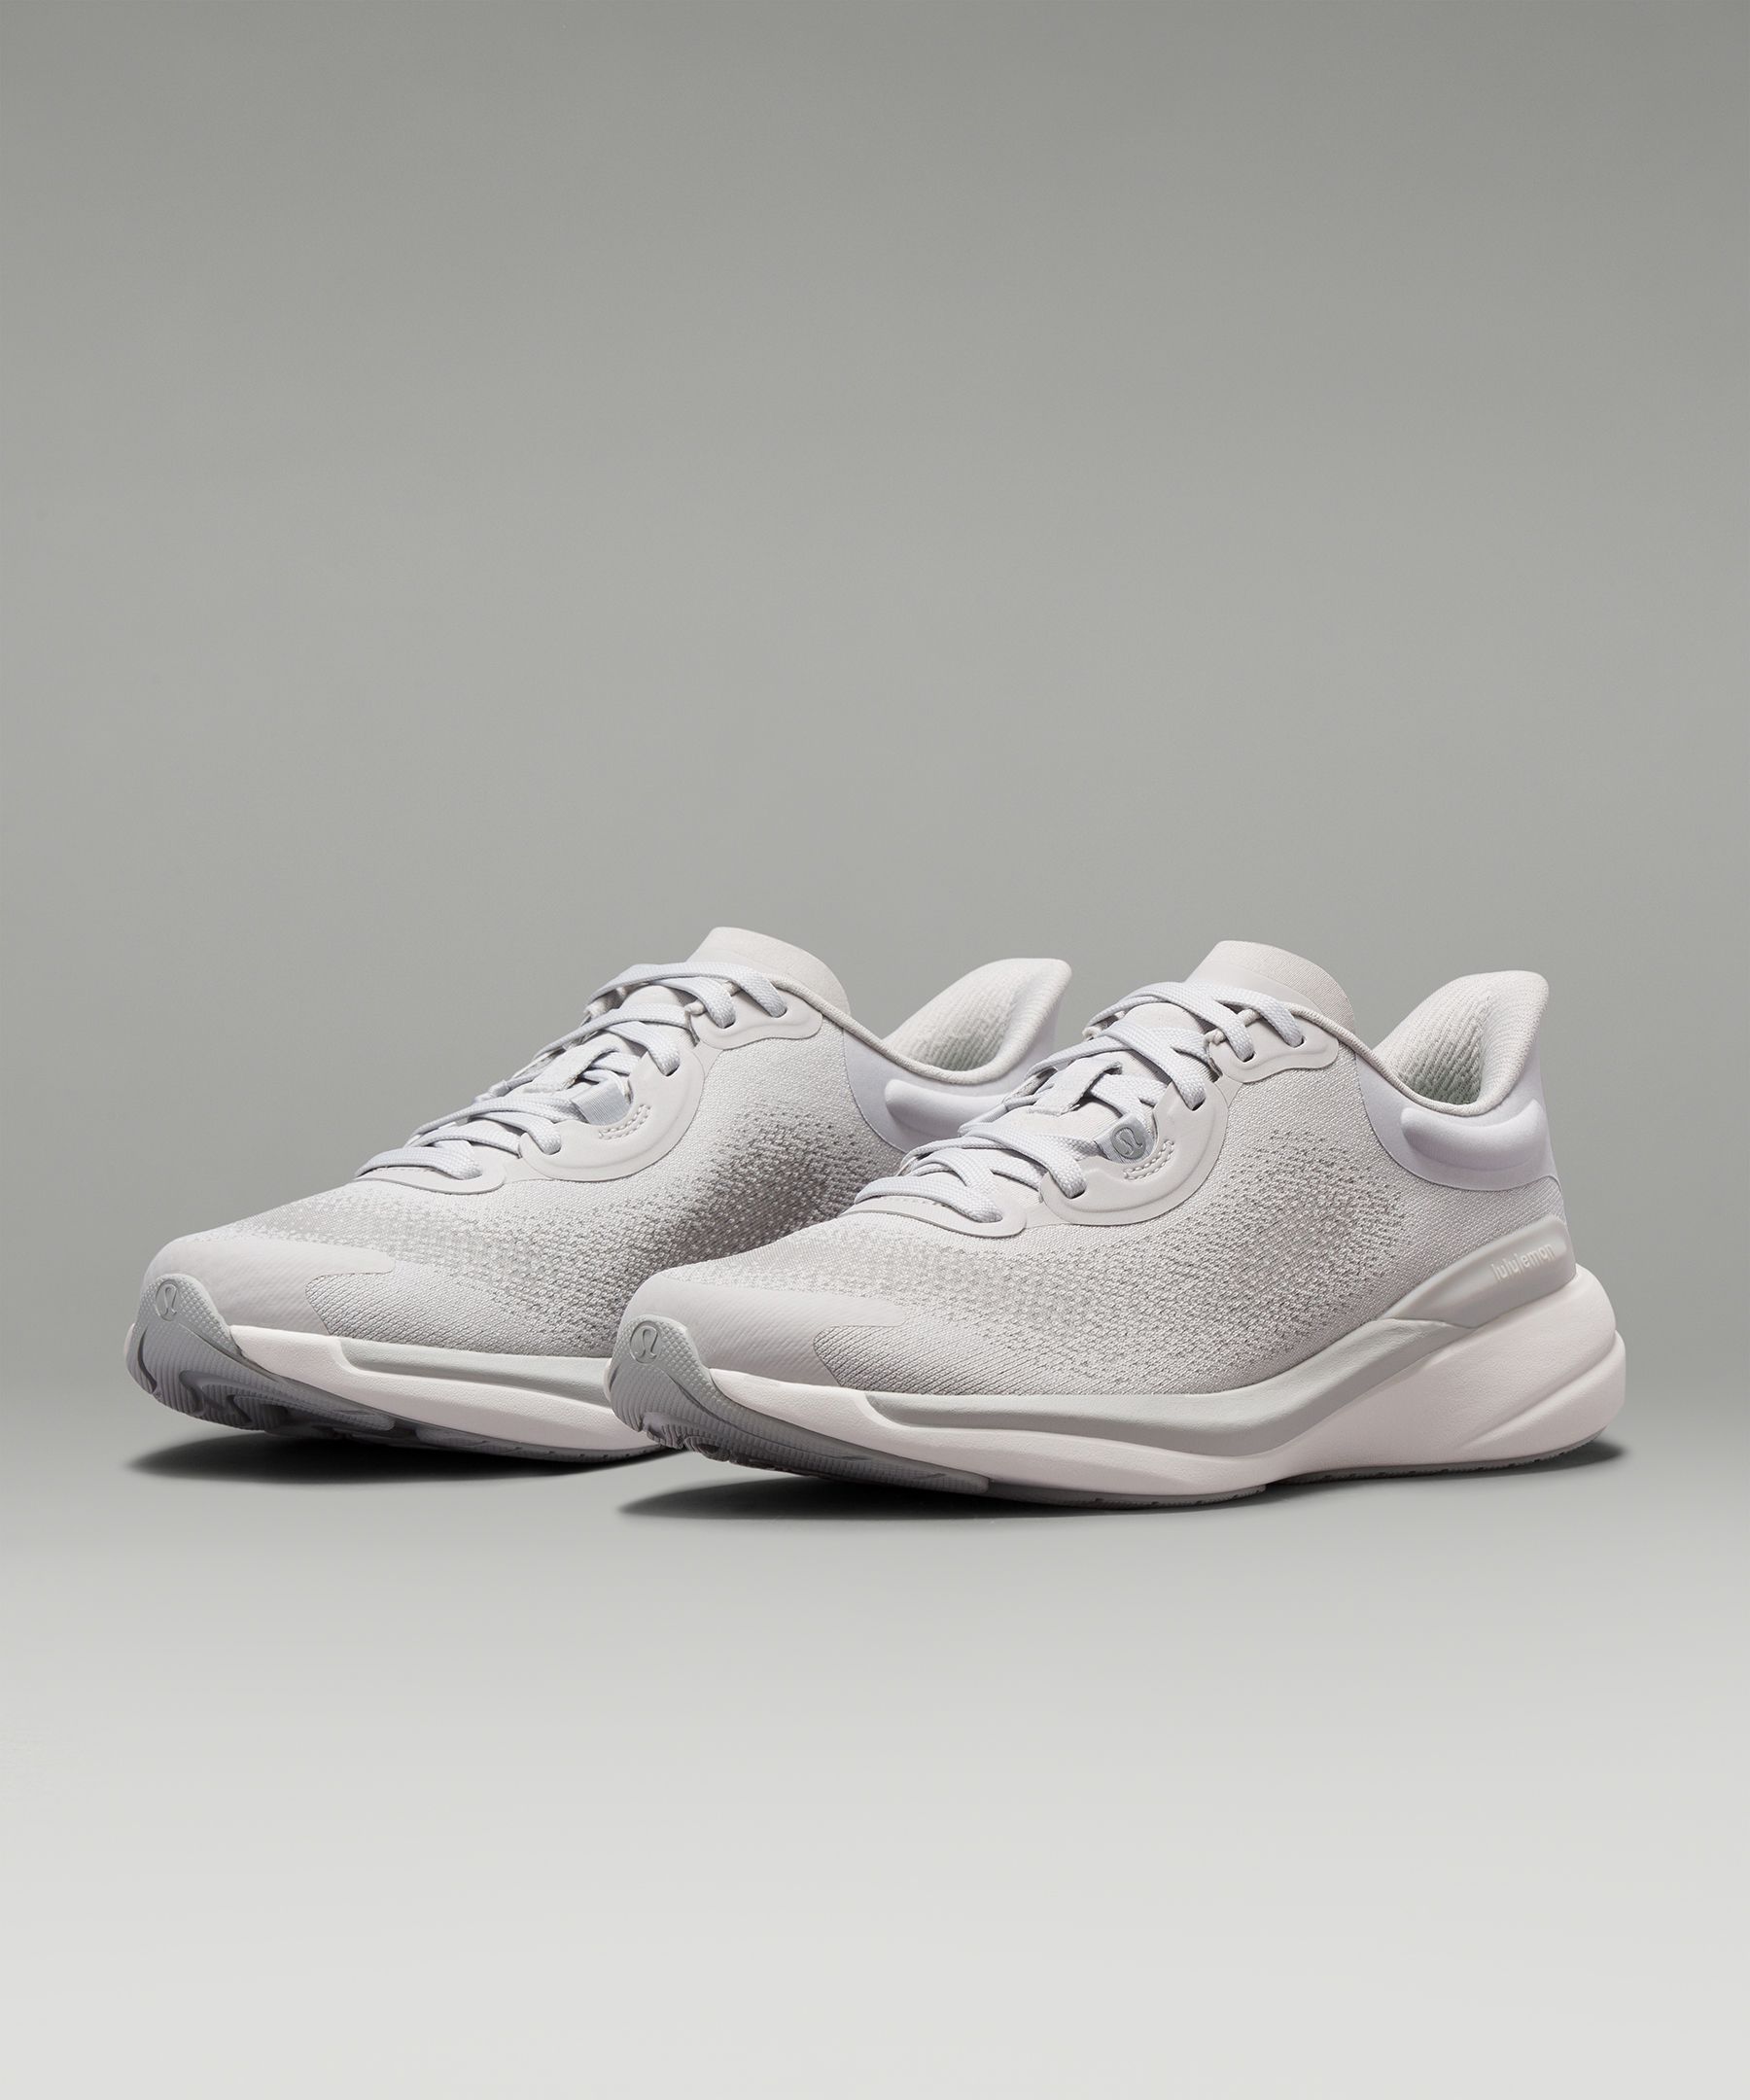 Lululemon Chargefeel 2 Low  Workout Shoes